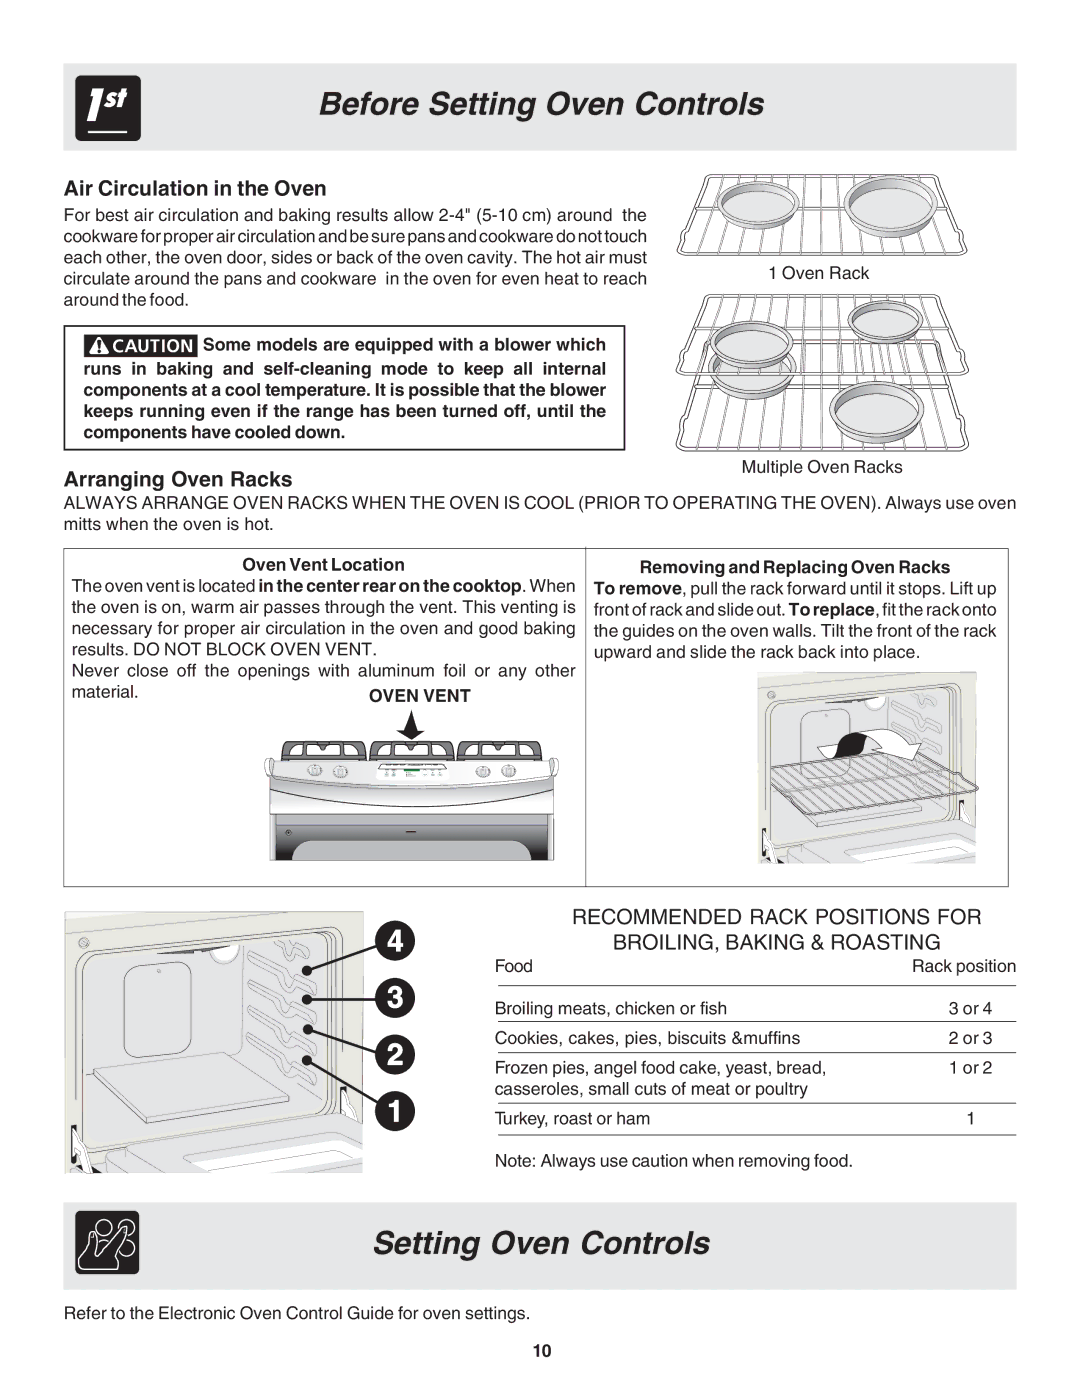 Frigidaire 318203877 manual Before Setting Oven Controls, Air Circulation in the Oven, Arranging Oven Racks 